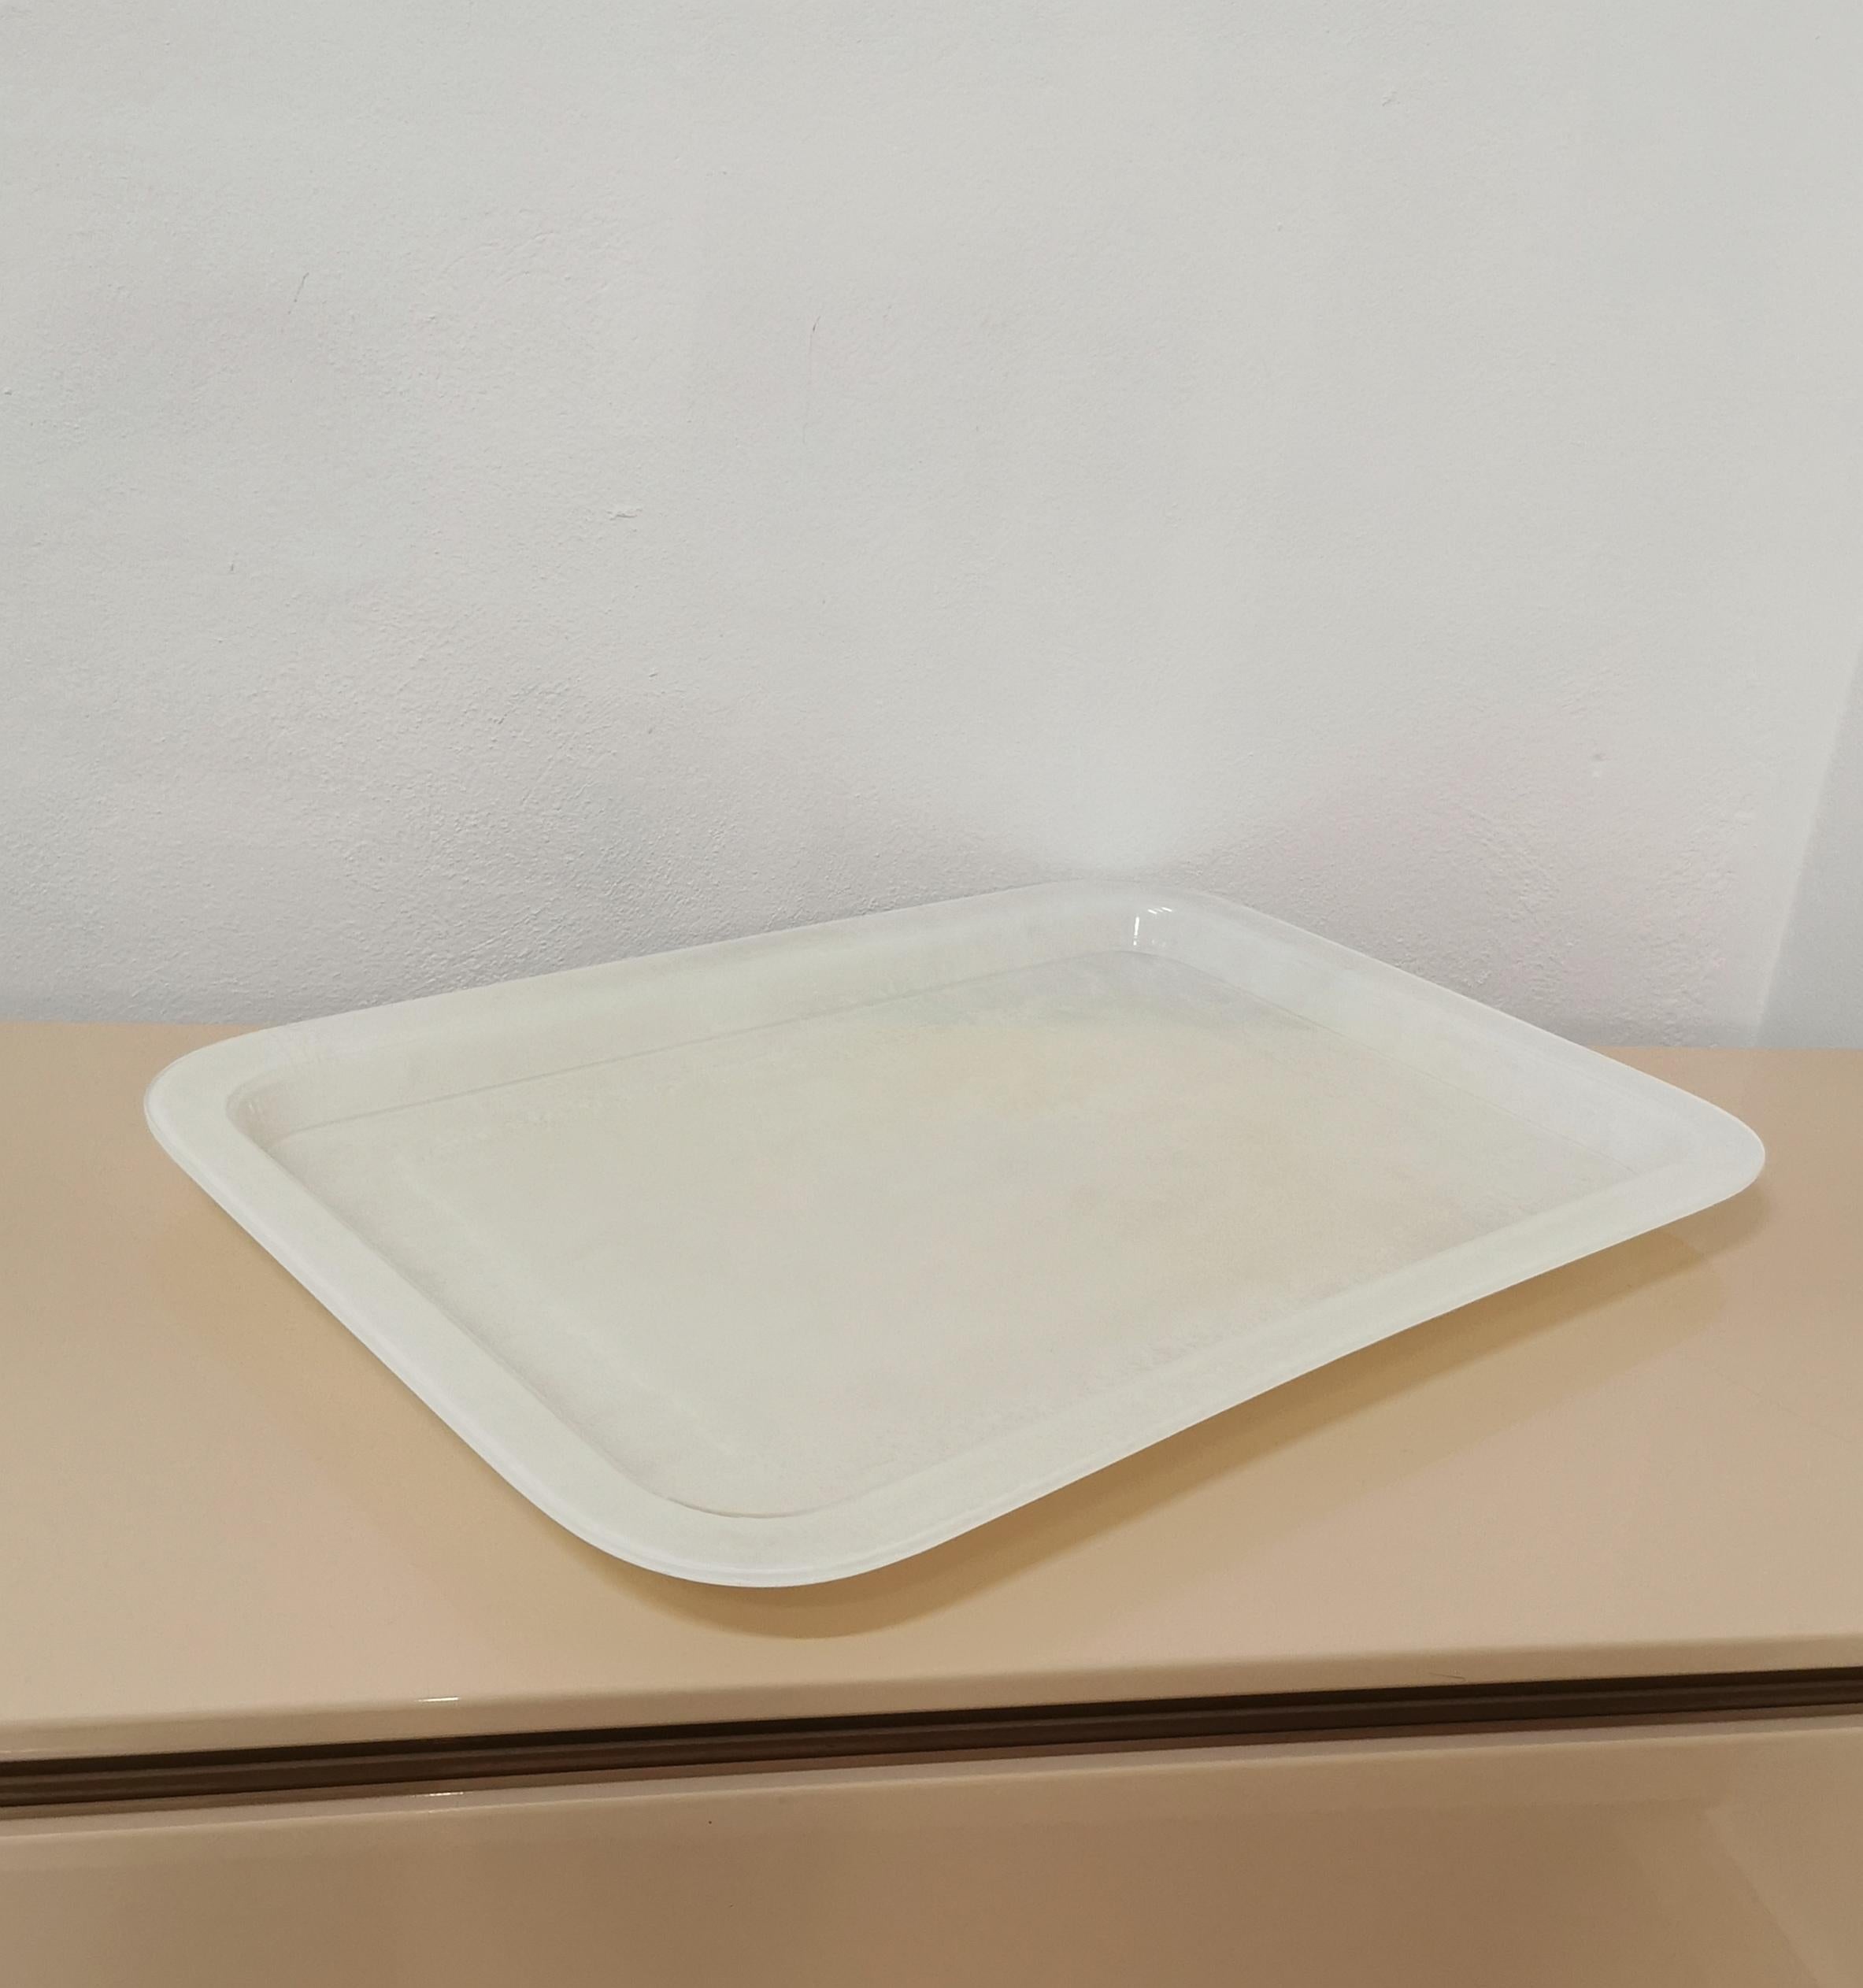 Italian Midcentury Modern Tray Table Serving Piece Rectangular White Lucite Italy 1970s For Sale